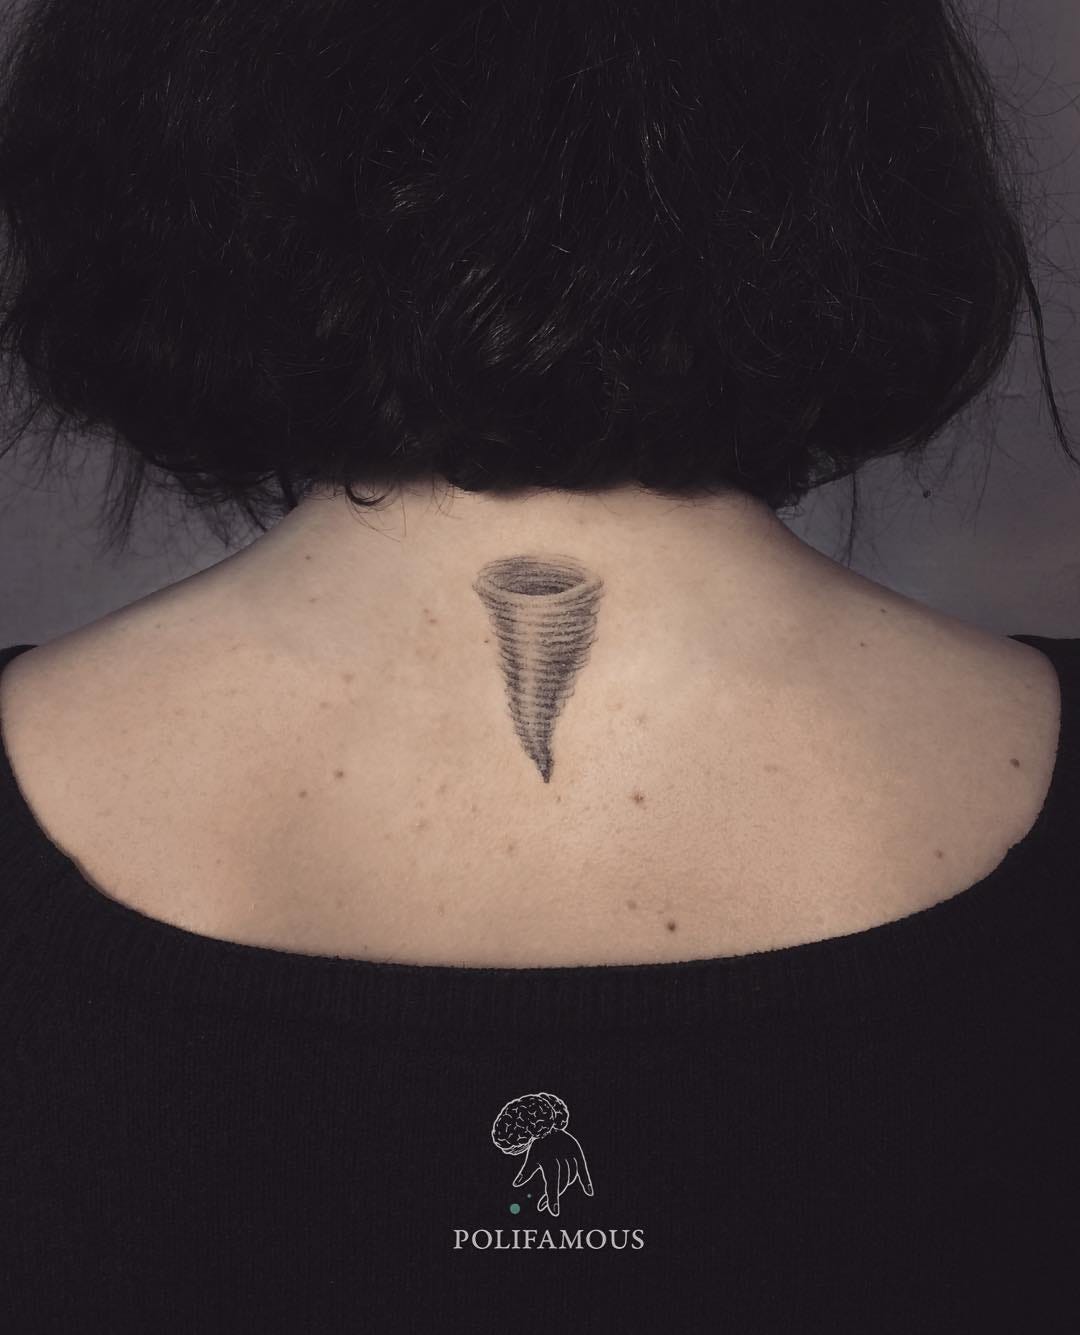 Dragon tattoos for women, by financerexpres